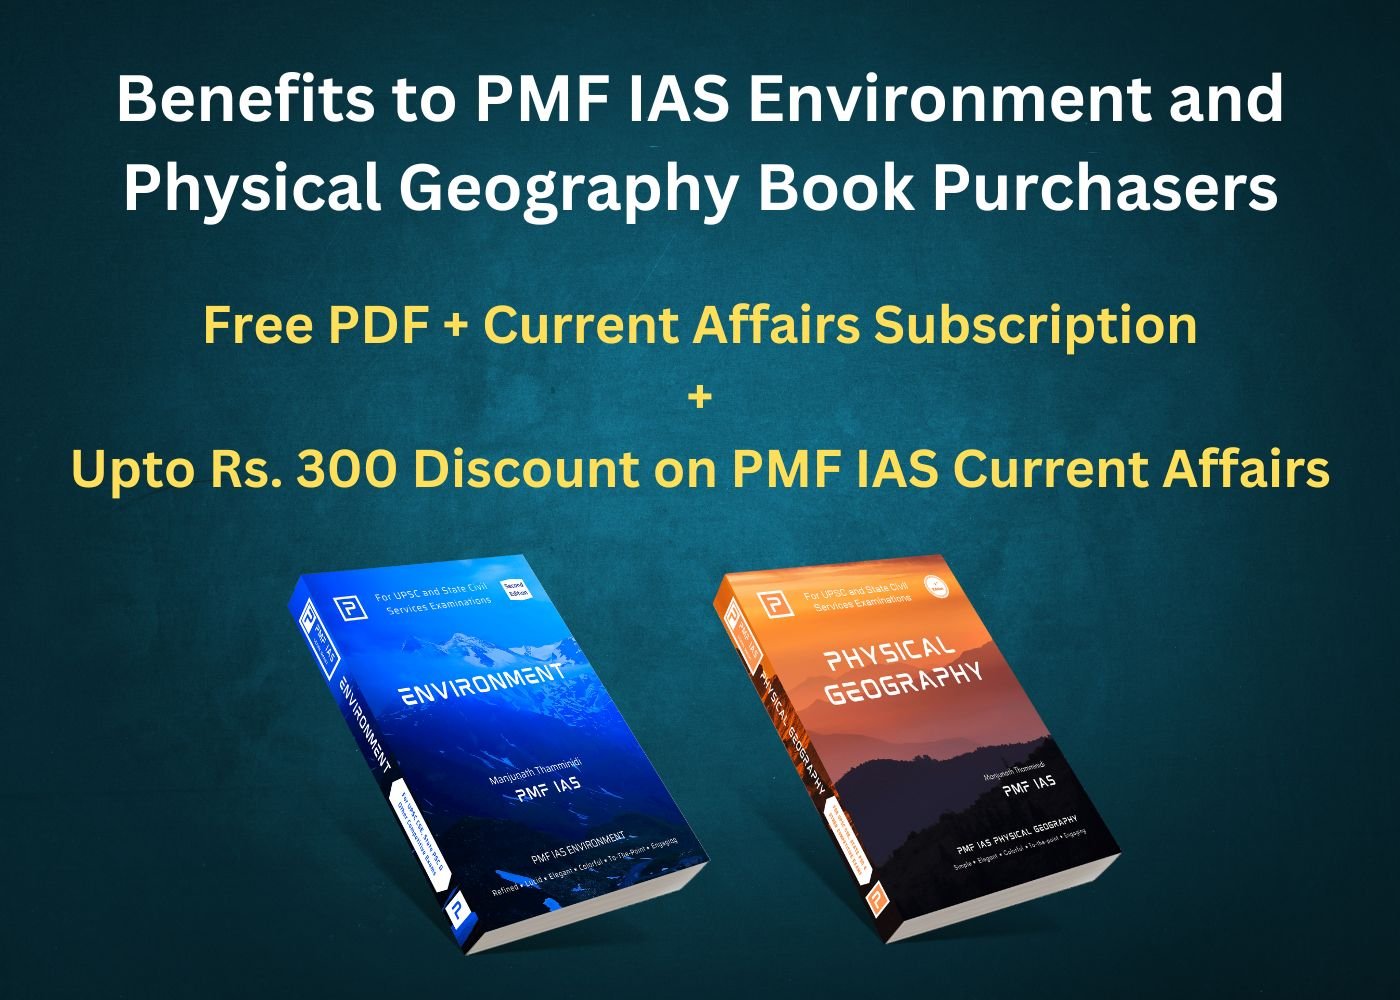 Benefits to PMF IAS Environment and Physical Geography Book Purchasers